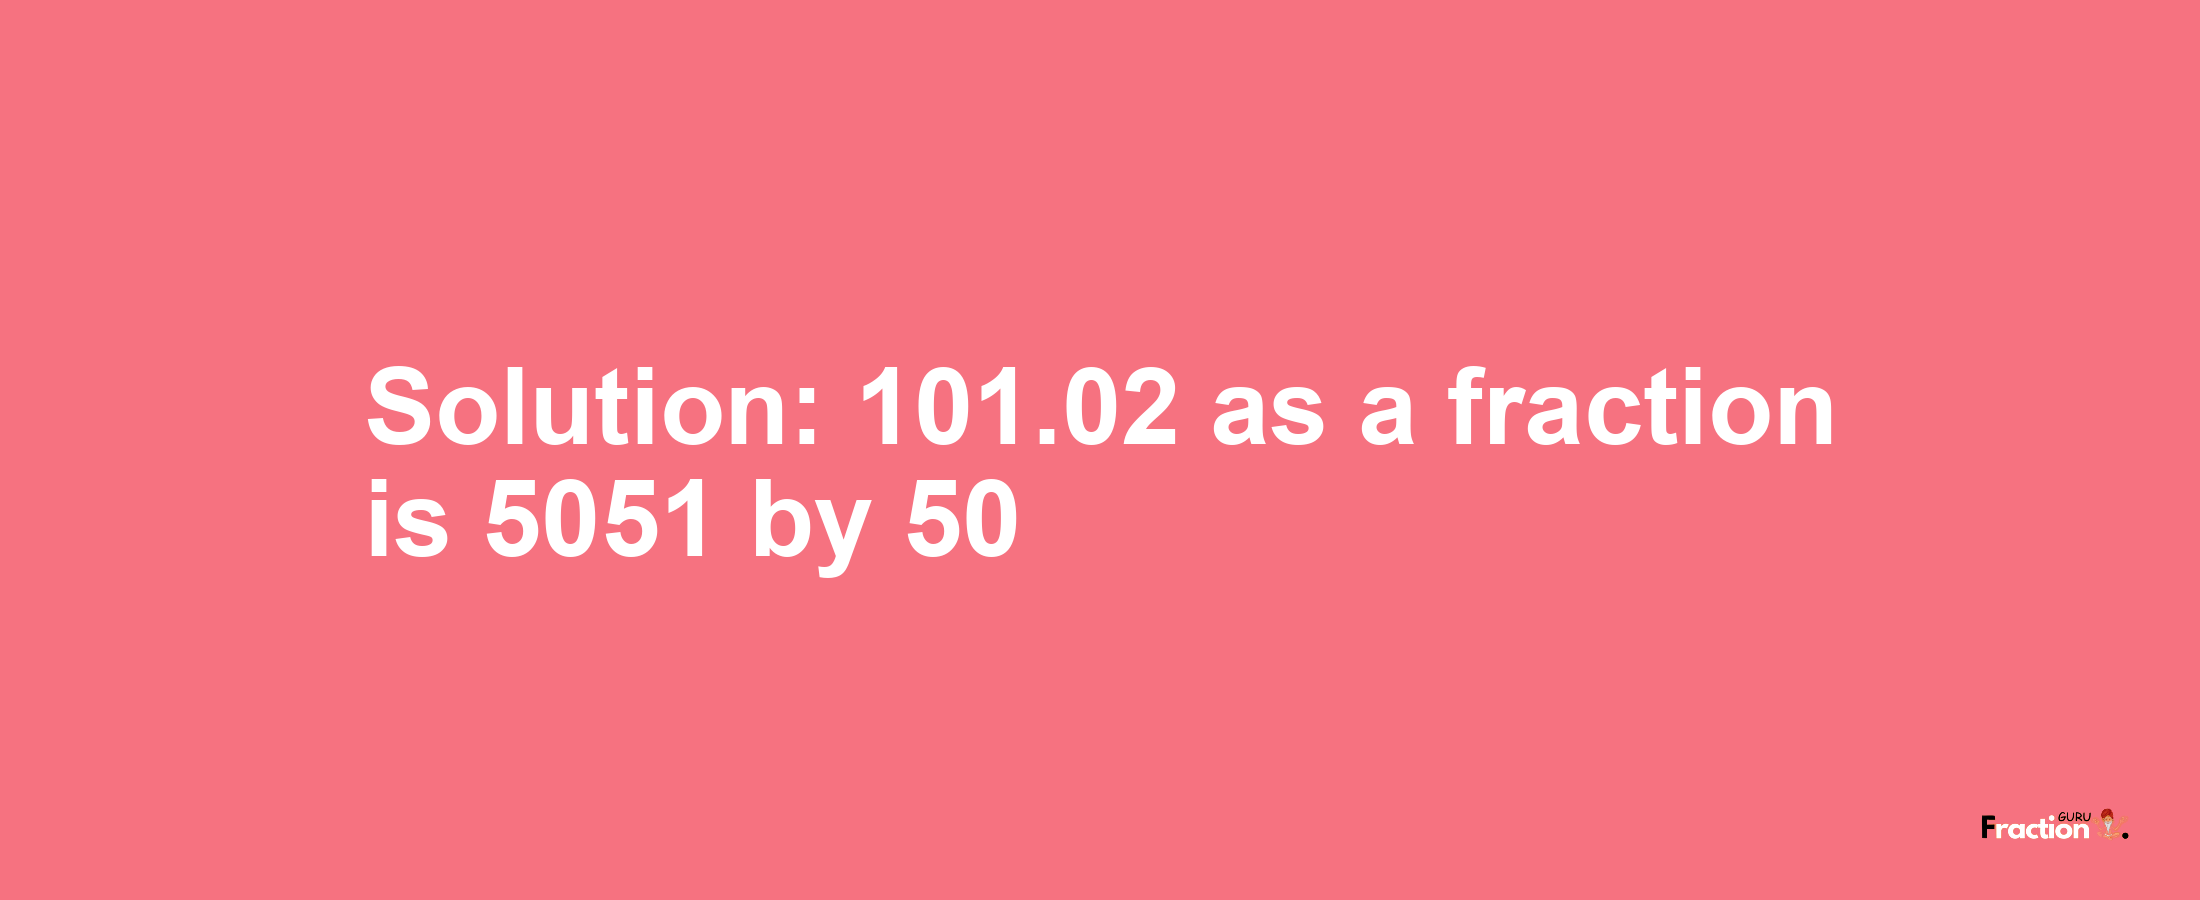 Solution:101.02 as a fraction is 5051/50